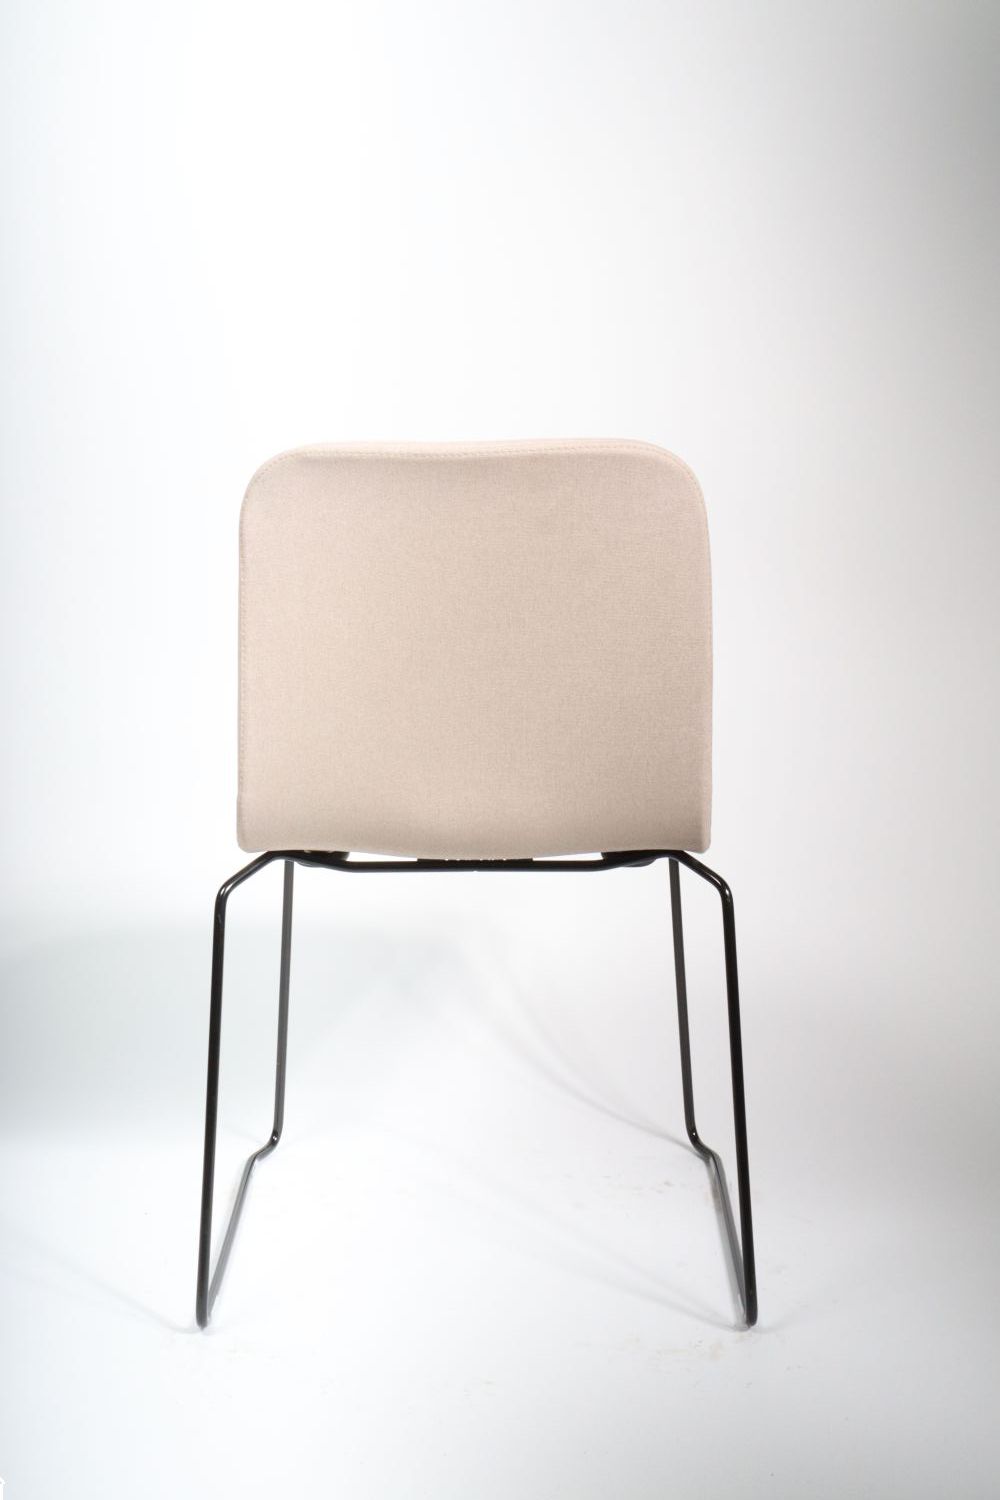 this 141 chair